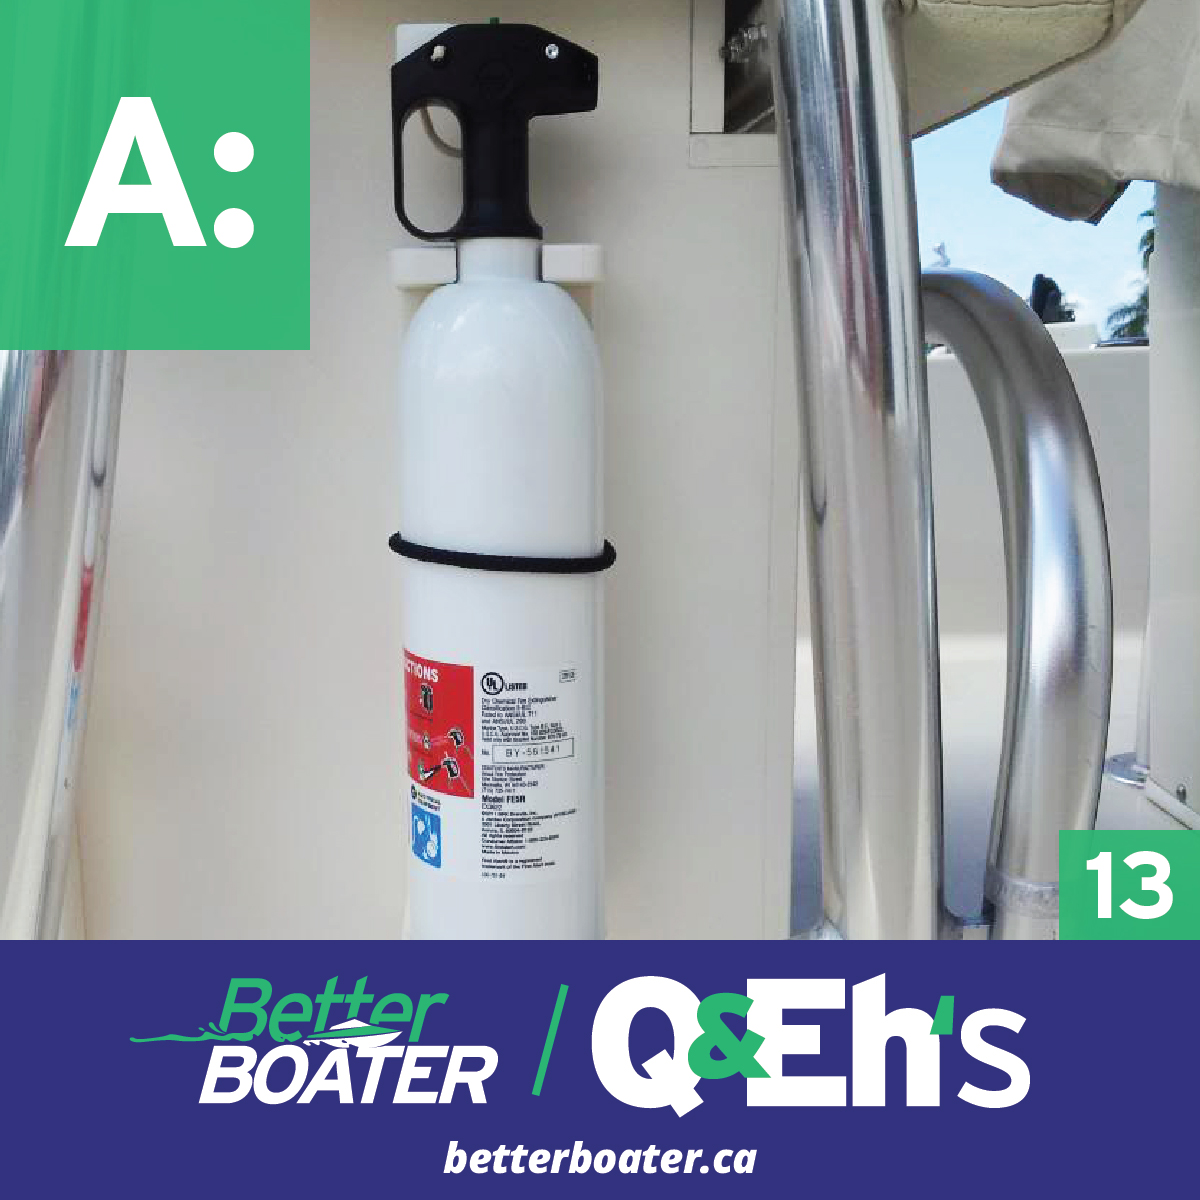 https://betterboater.ca/Safety%20Equipment%20Think